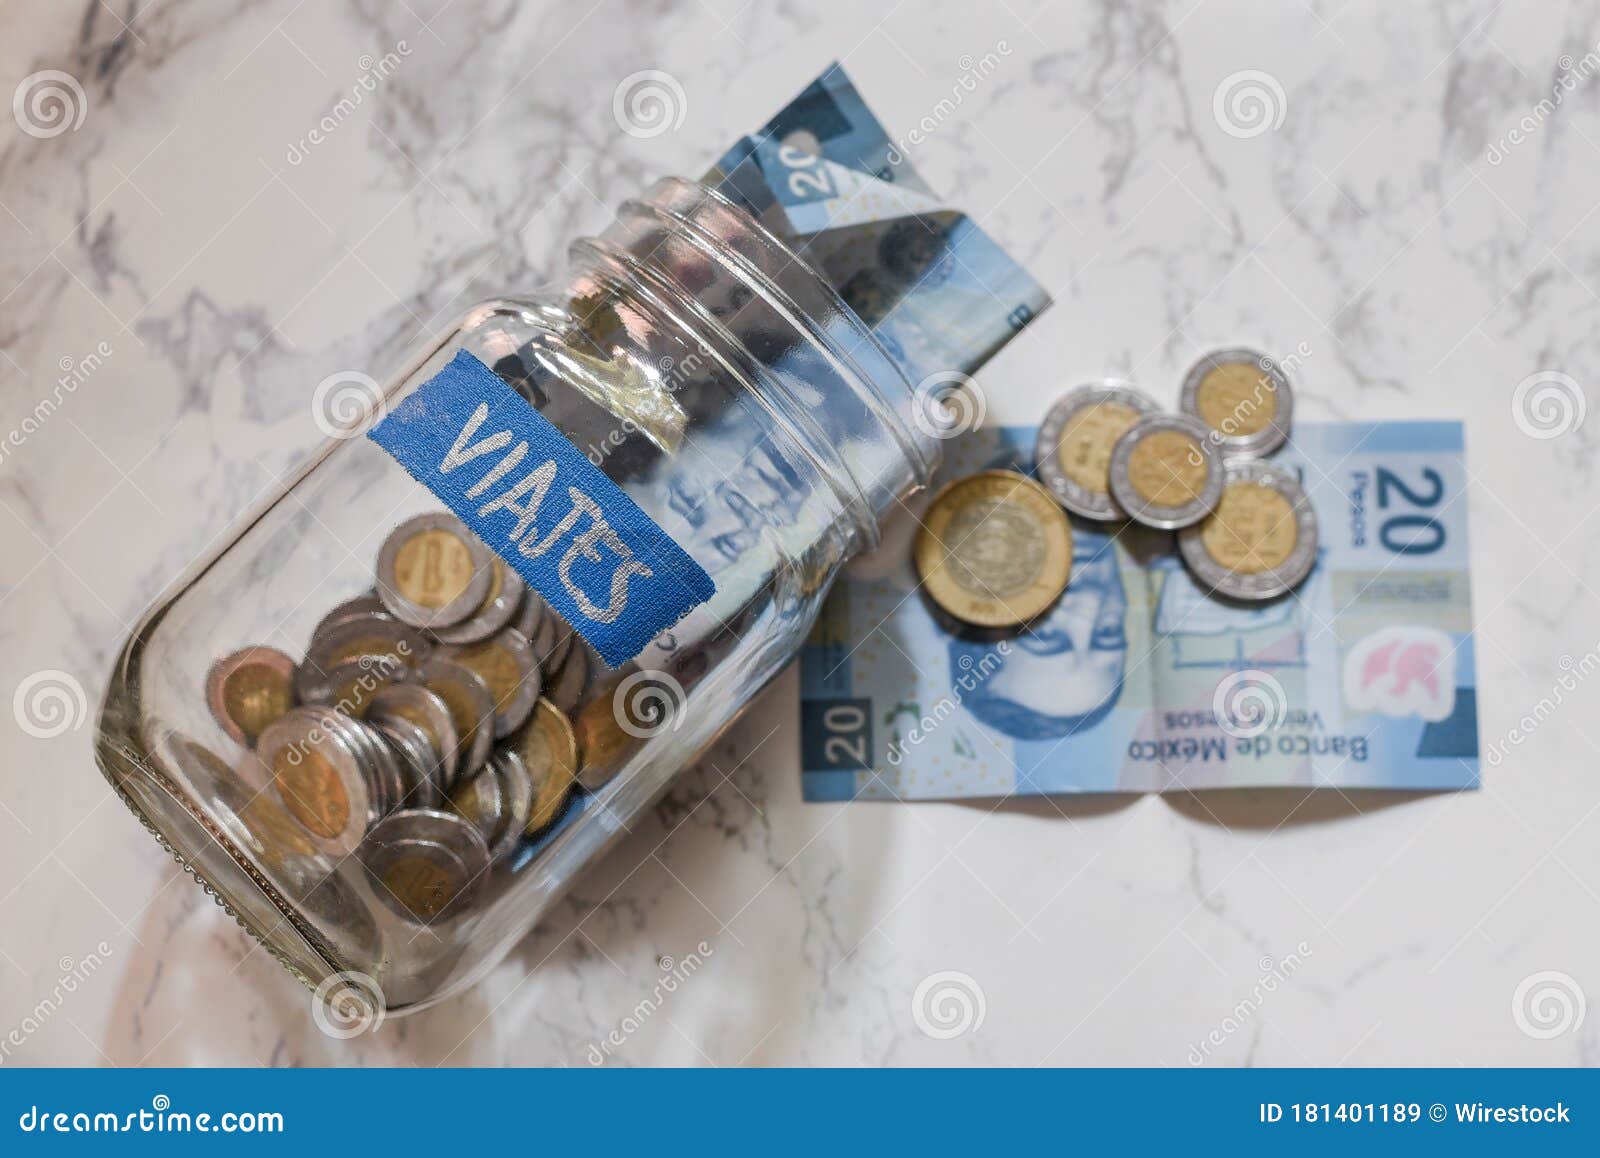 high angle view of pesos and coins in a jar with a [viajes - travels] sticker on it on the table